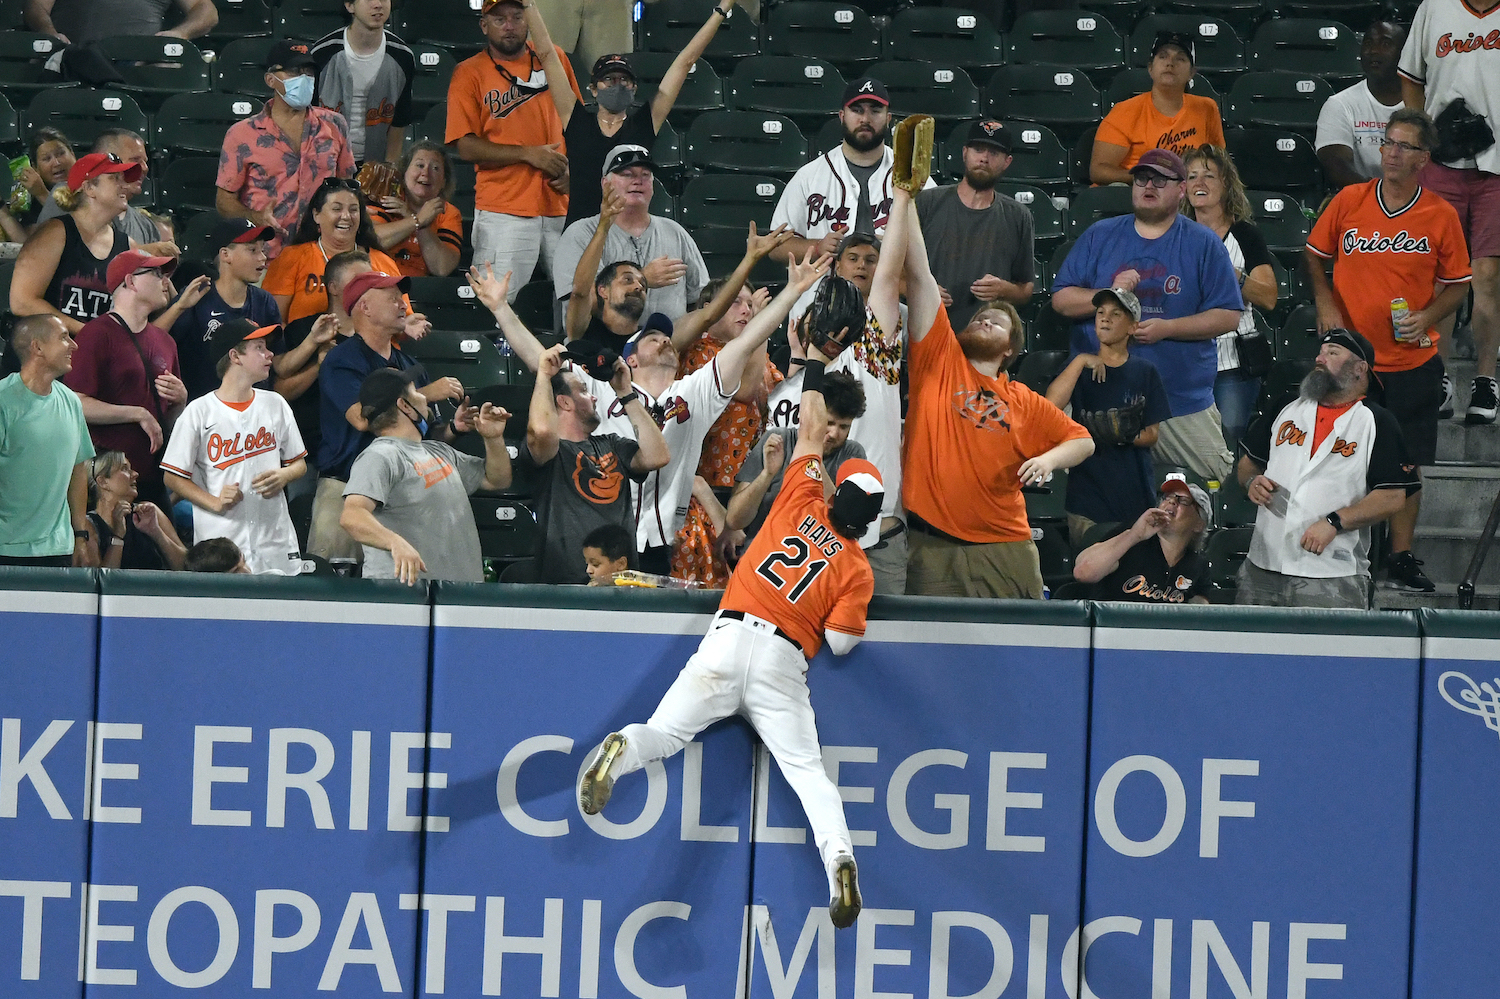 Austin Hays #21 of the Baltimore Orioles can not get to a home run hit ball by Austin Riley #27 (not pictured) of the Atlanta Braves fifth inning during a baseball game at Oriole Park at Camden Yards on August 21, 2021 in Baltimore, Maryland.